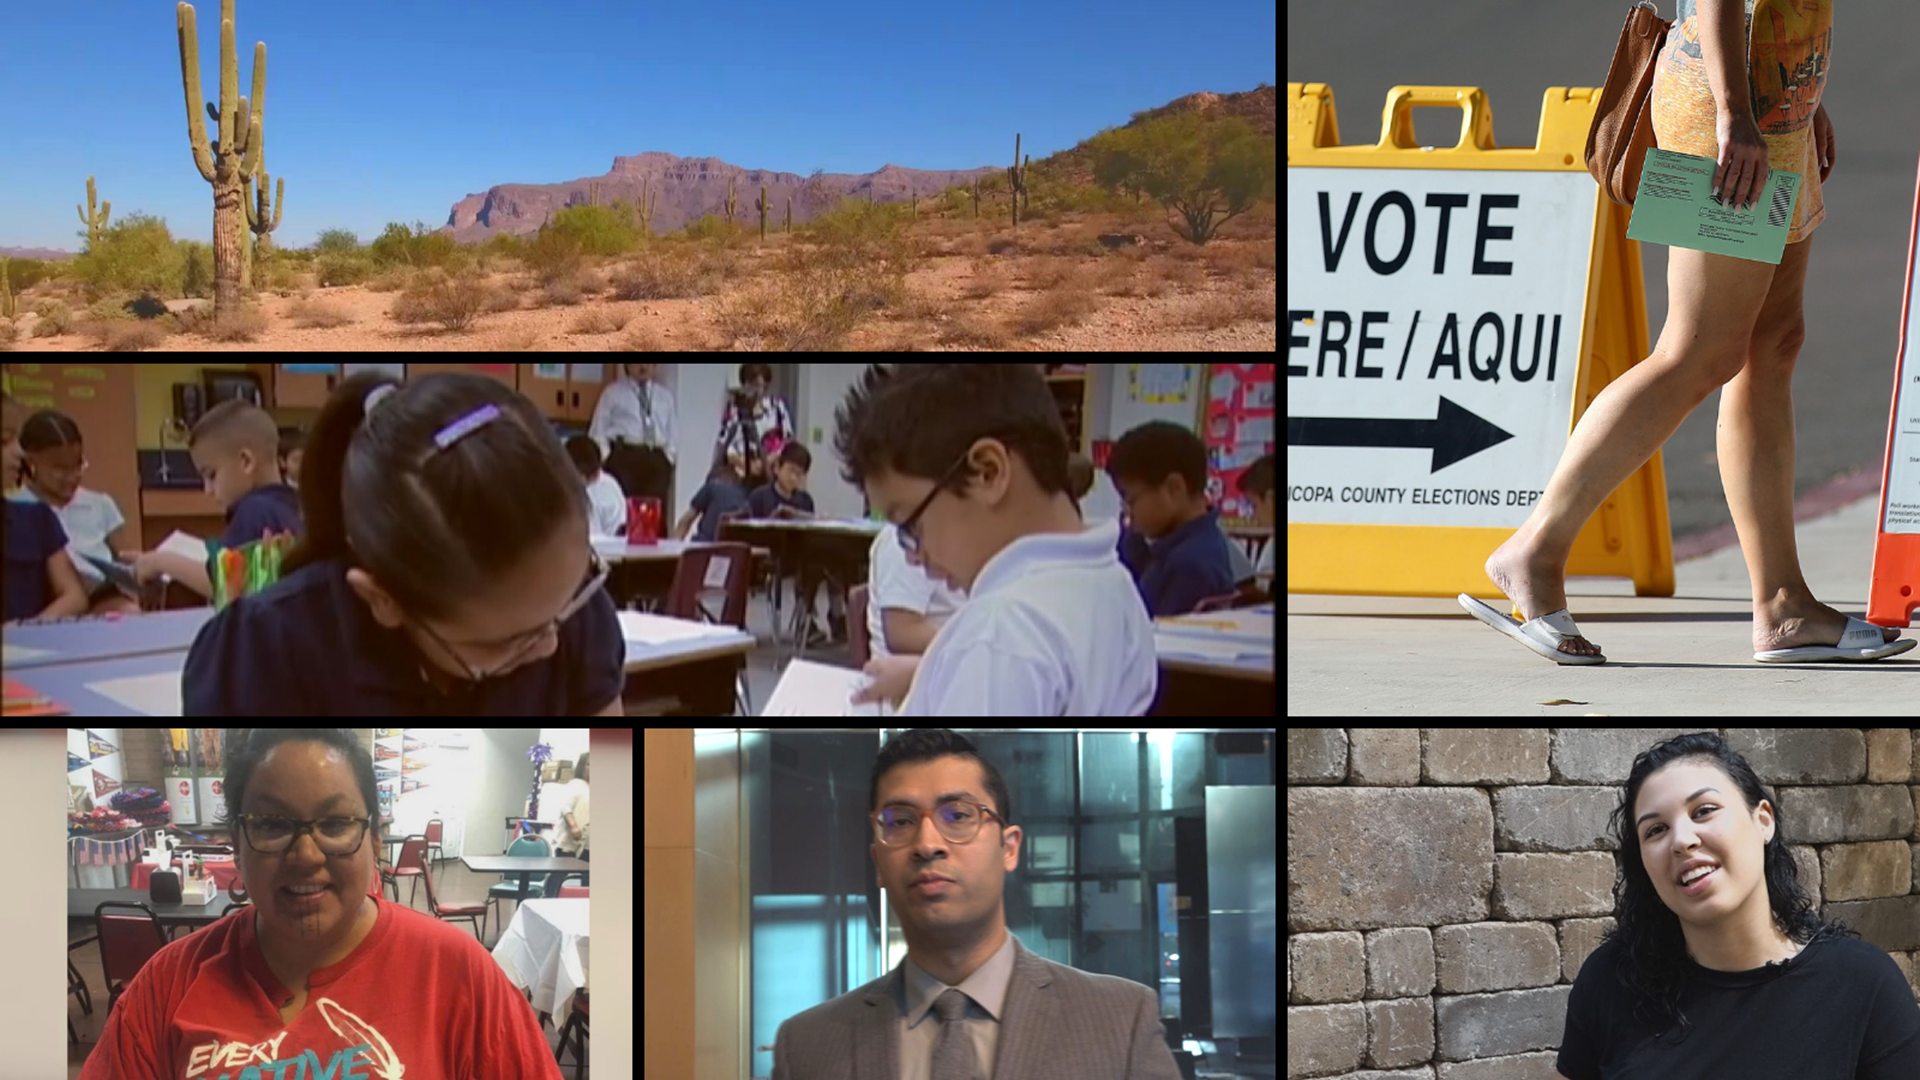 Arizona is closer than the rest of the country to becoming a "minority-majority" state. The face of Arizona is changing. Learn what that means for us. 12news.com/ChangingAZ